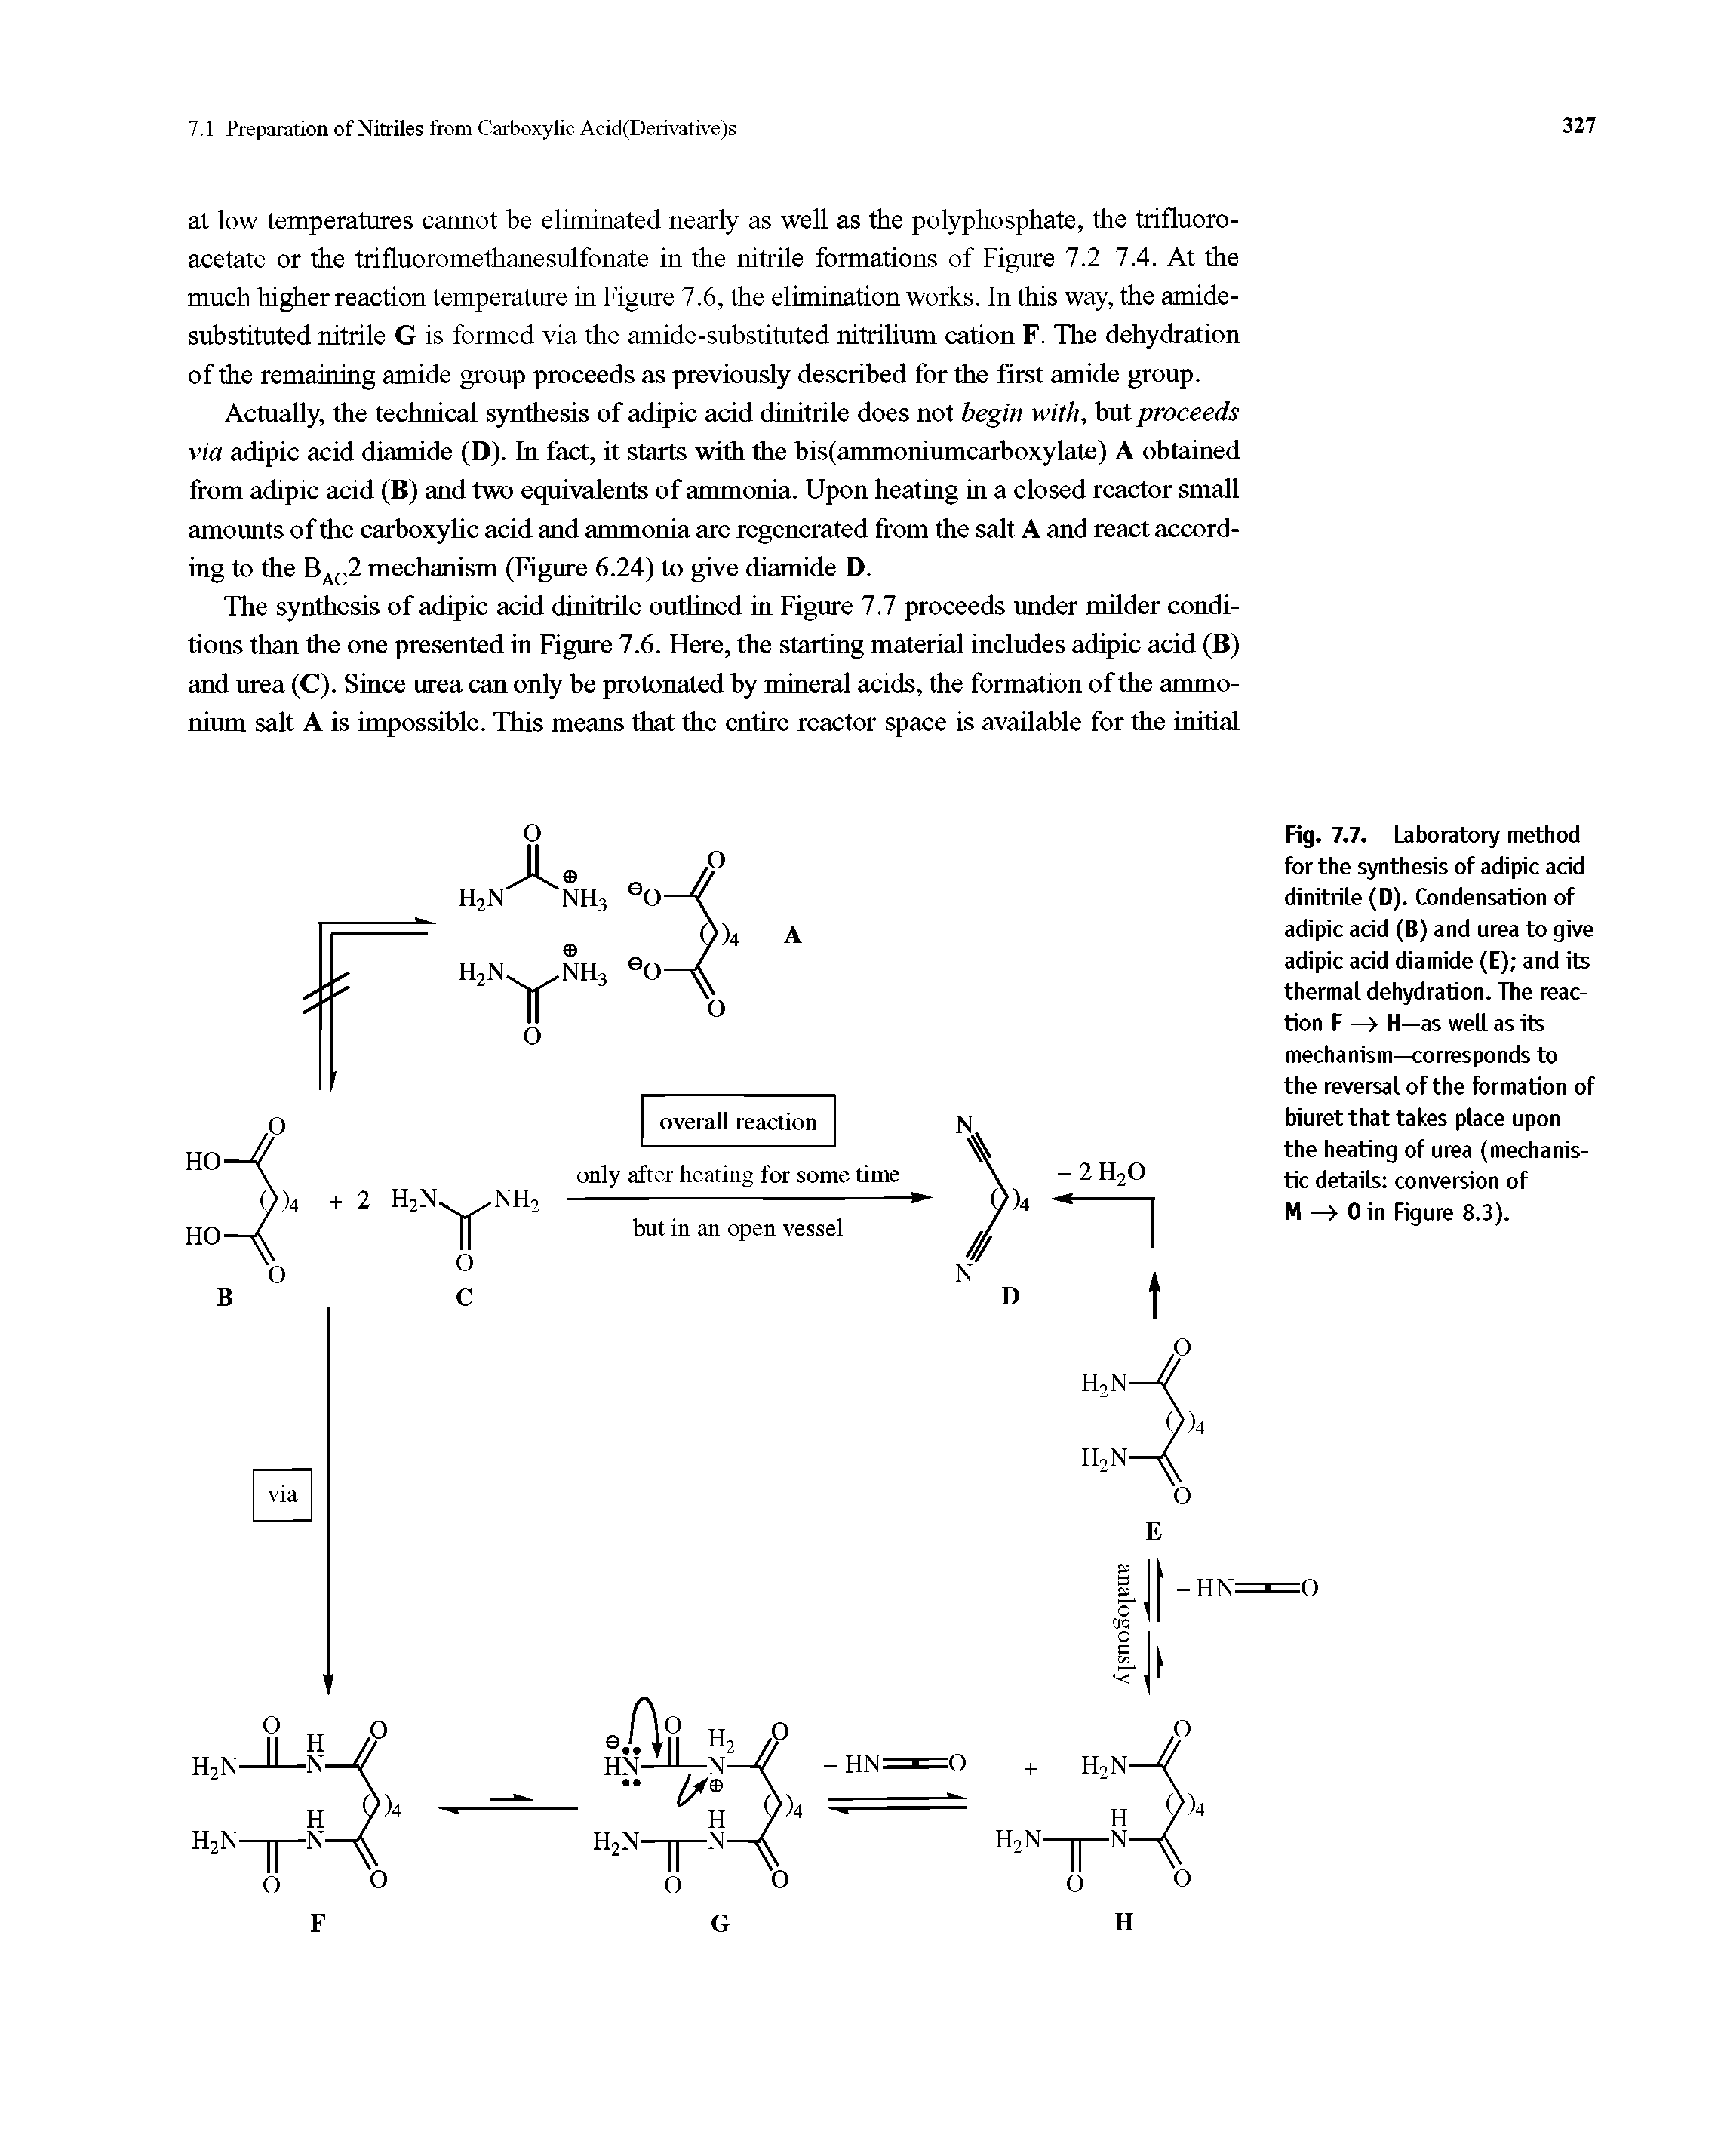 Fig. 7.7. Laboratory method for the synthesis of adipic acid dinitrile (D). Condensation of adipic acid (B) and urea to give adipic acid diamide (E) and its thermal dehydration. The reaction F — H—as well as its mechanism—corresponds to the reversal of the formation of biuret that takes place upon the heating of urea (mechanistic details conversion of M —> 0 in Figure 8.3).